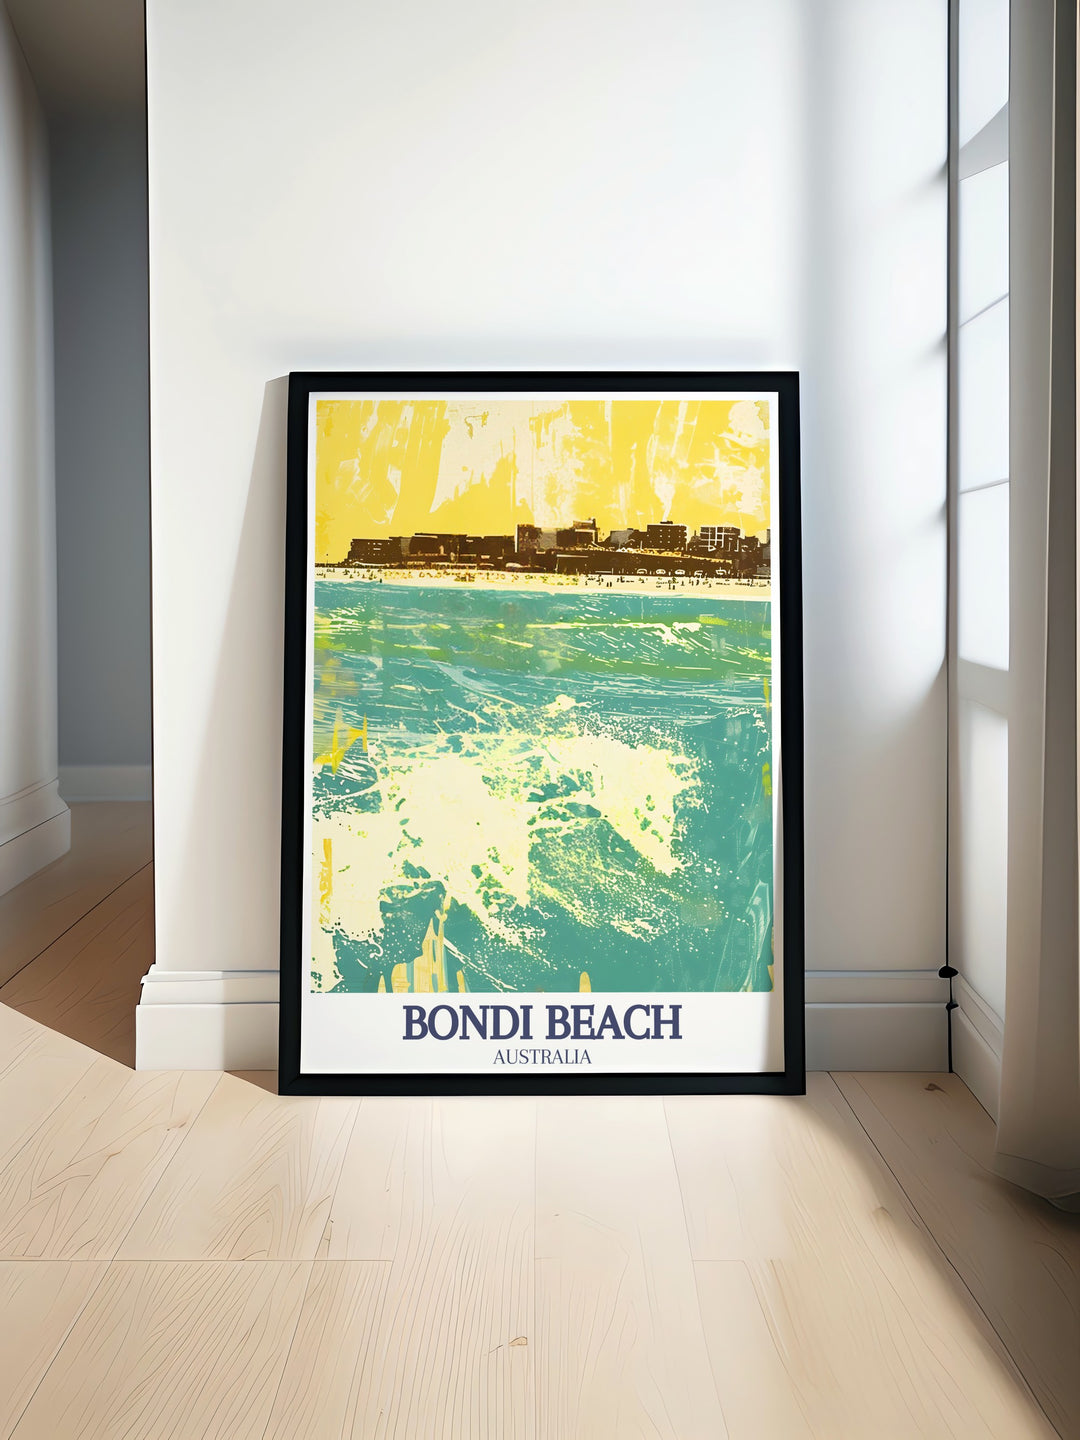 Vintage poster of Sydney Harbour featuring the iconic Sydney Opera House and Harbour Bridge with vibrant colors. Bondi, South Bondi Beach prints showcase the lively atmosphere and natural beauty, perfect for adding a touch of Australia art to your home decor.